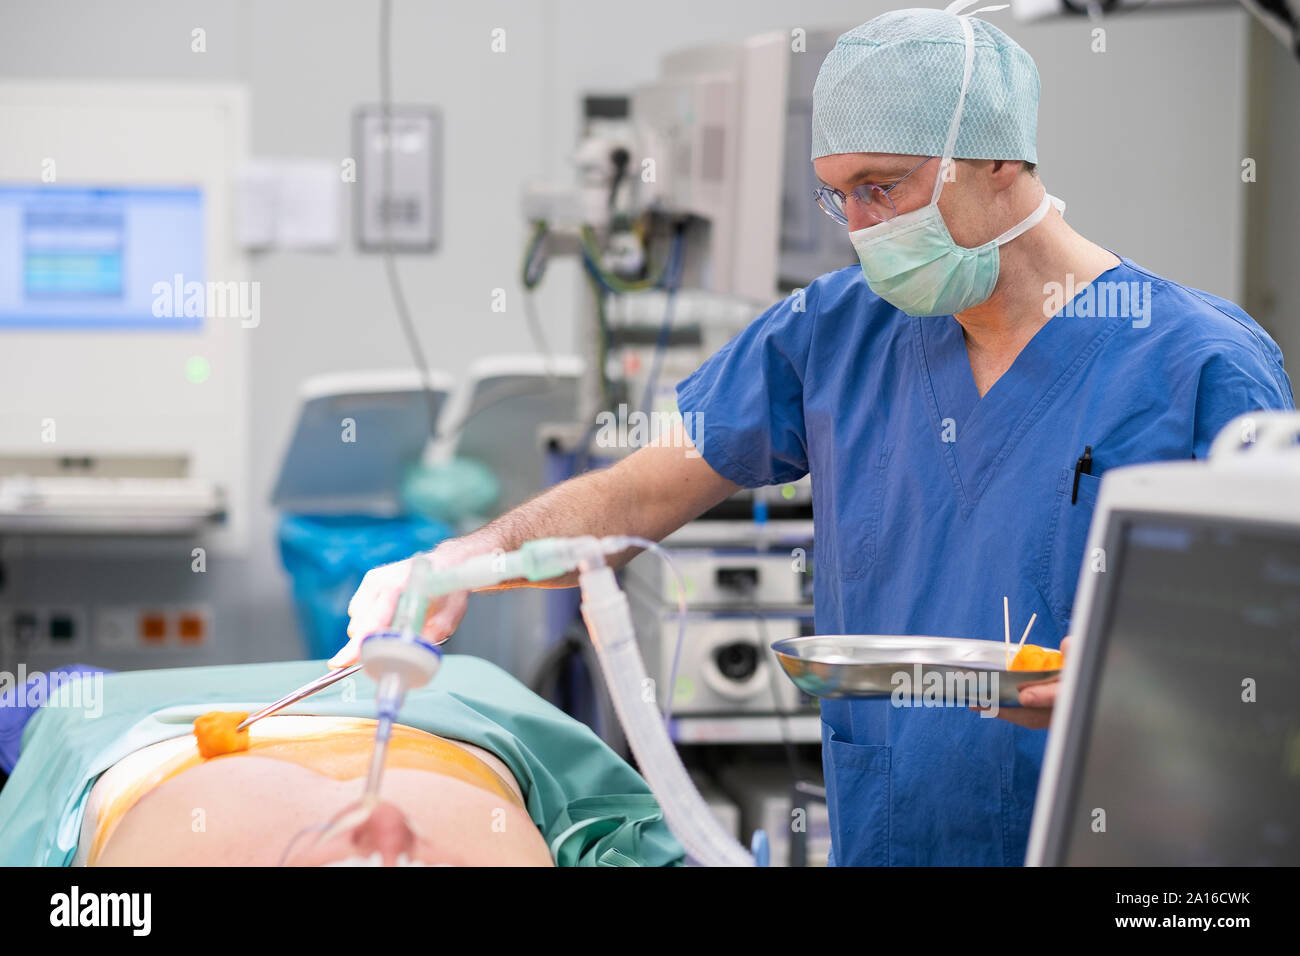 Surgeon during surgery, disinfecting Stock Photo